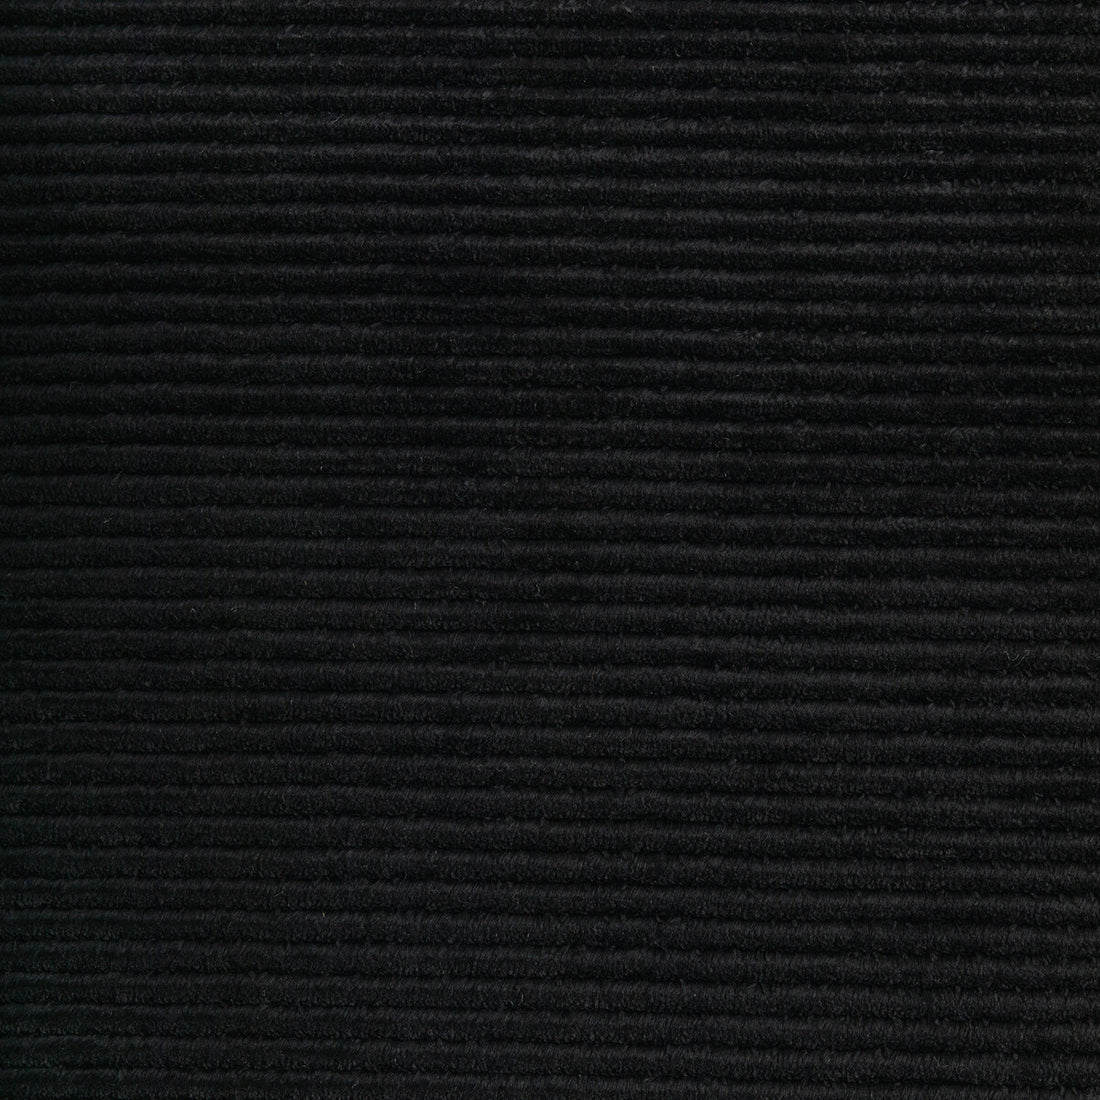 Justly Famous fabric in noir color - pattern 33950.8.0 - by Kravet Couture in the Modern Luxe III collection